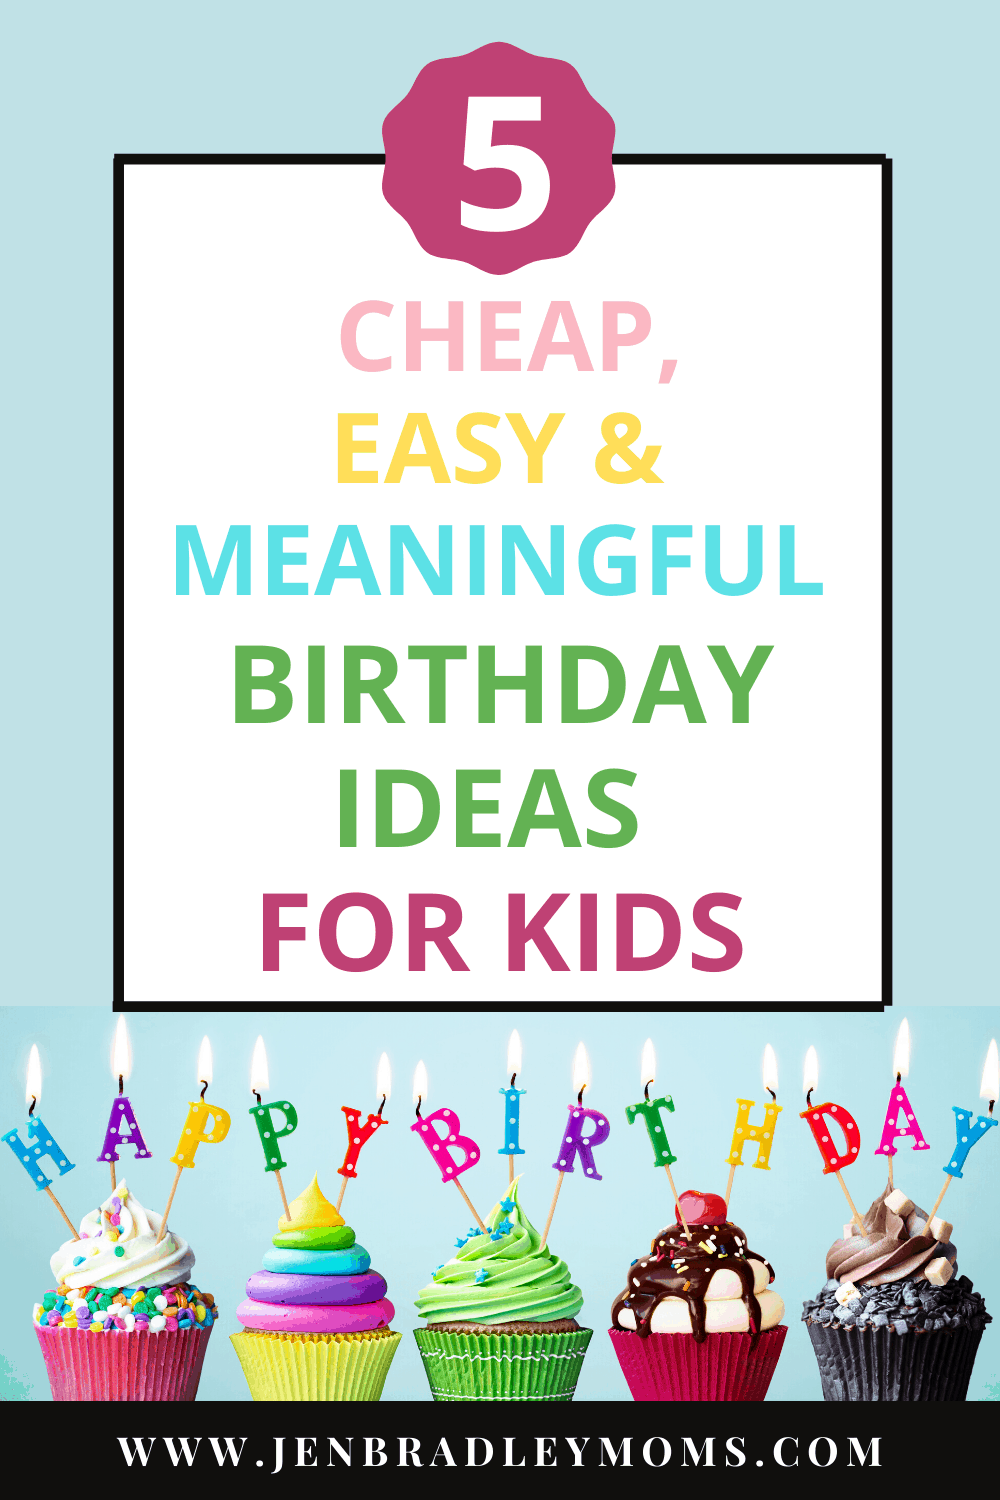 5 Cheap, Easy, and Meaningful Birthday Ideas for Kids